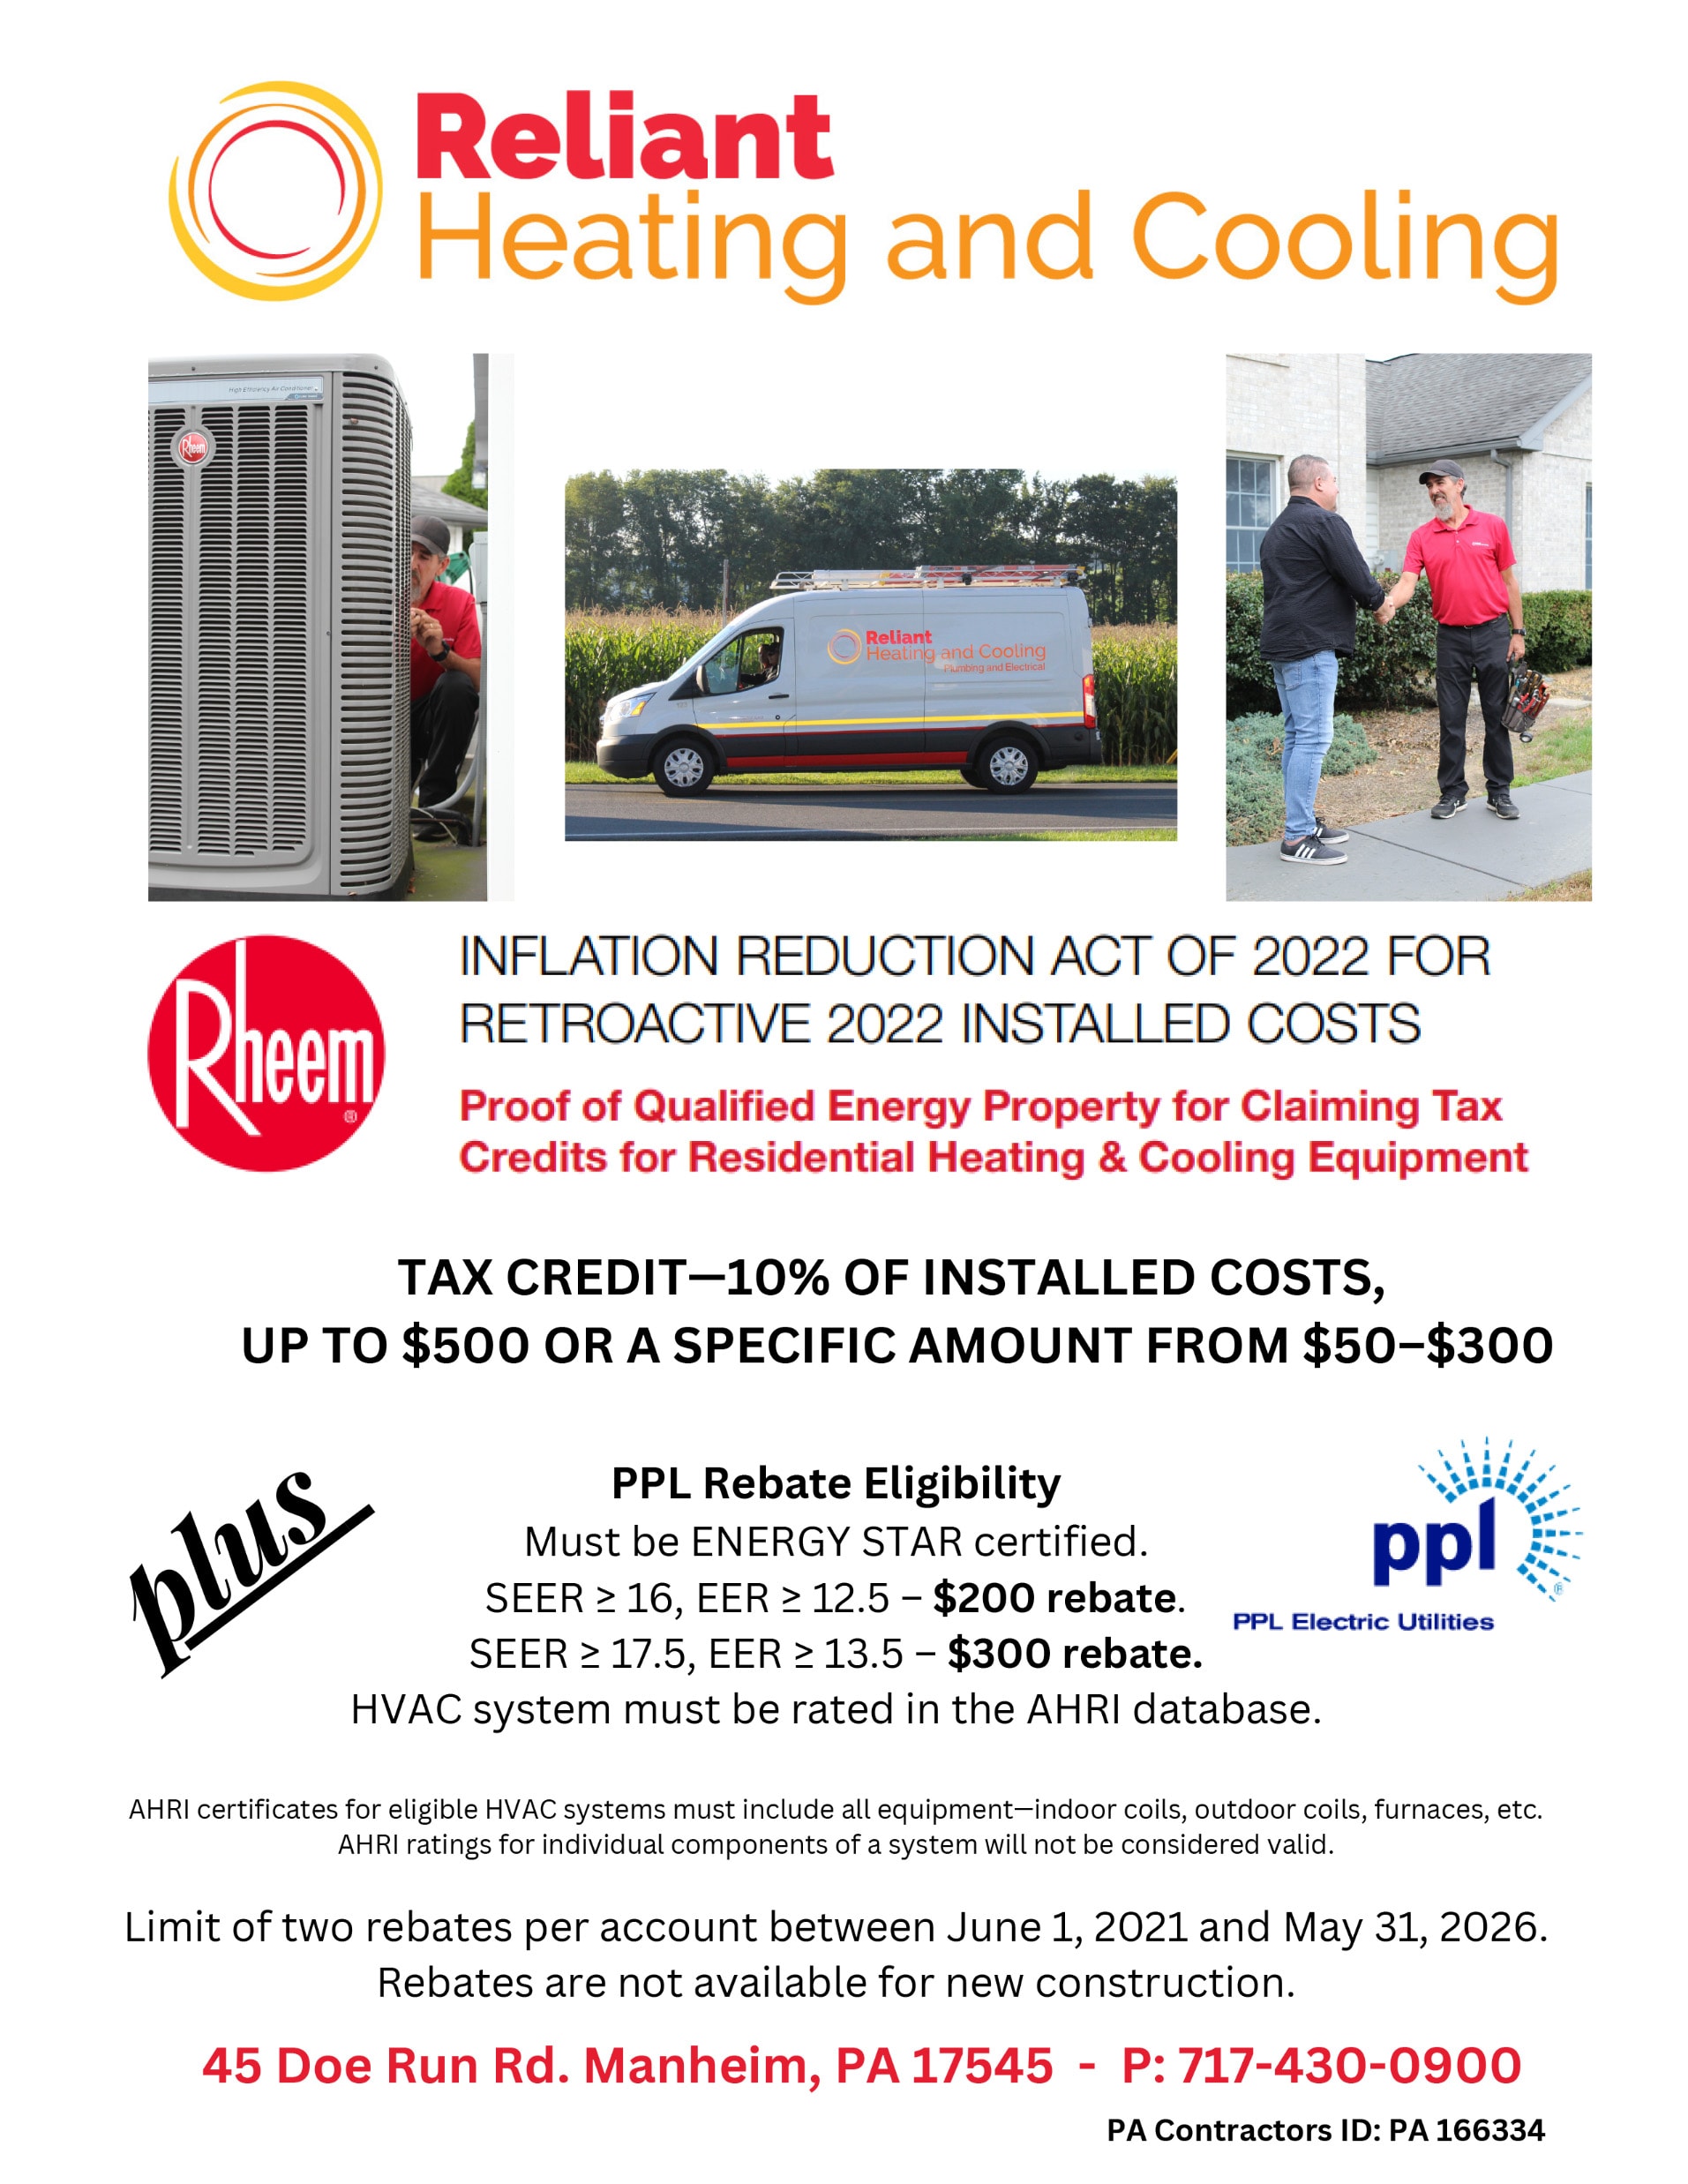 Specials Reliant Heating Cooling Discounts Manheim PA